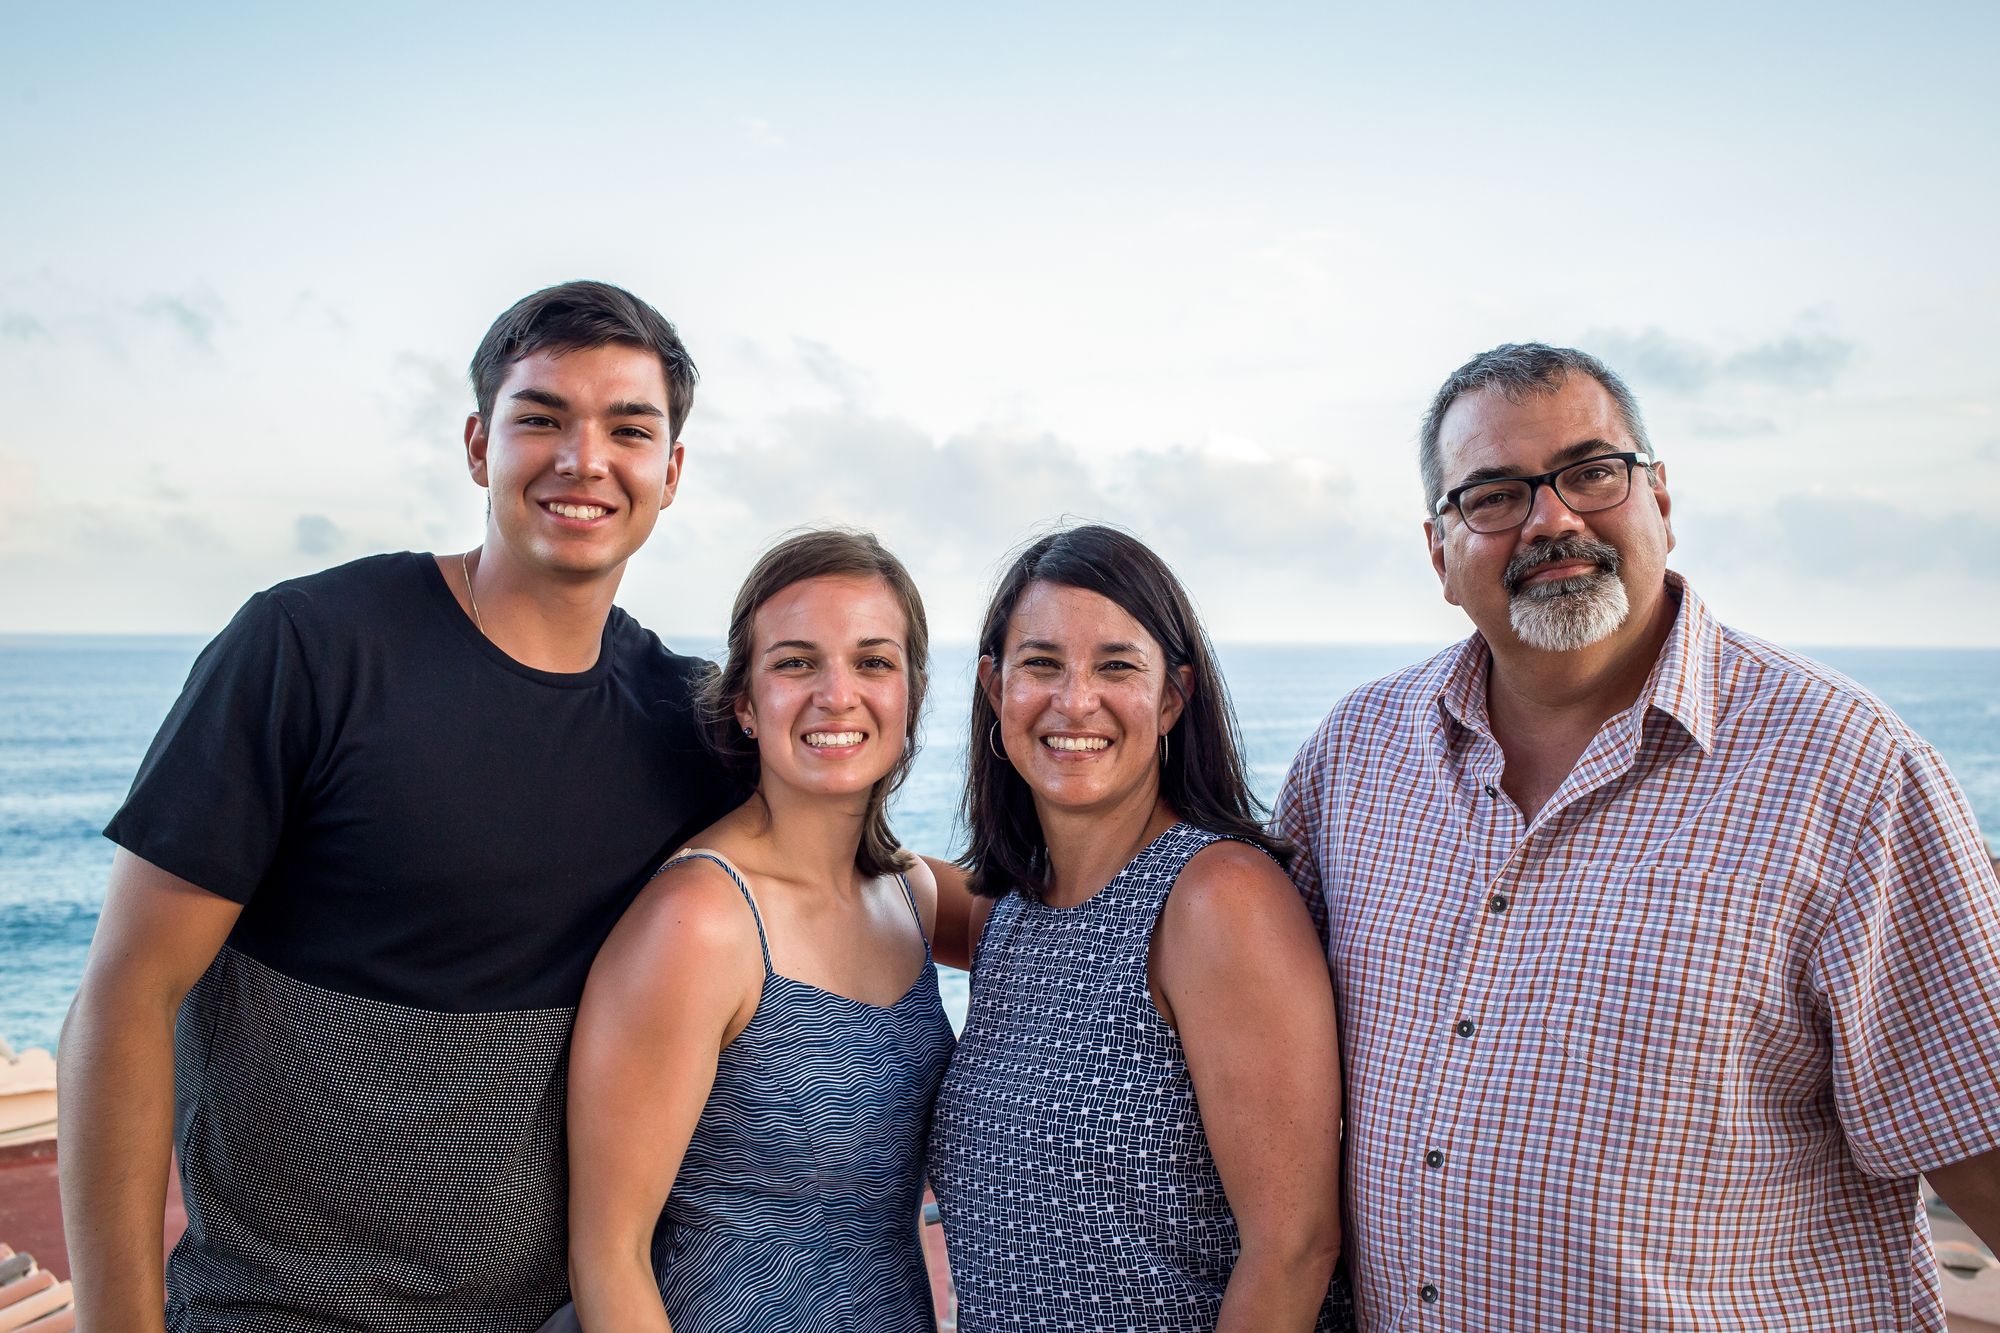 A family of four stand smiling in front of an ocean. A young man wearing a navy shirt, a young woman wearing a blue dress, a woman wearing a blue tank top, a man with glasses and a grey beard wearing a red and blue plaid shirt.